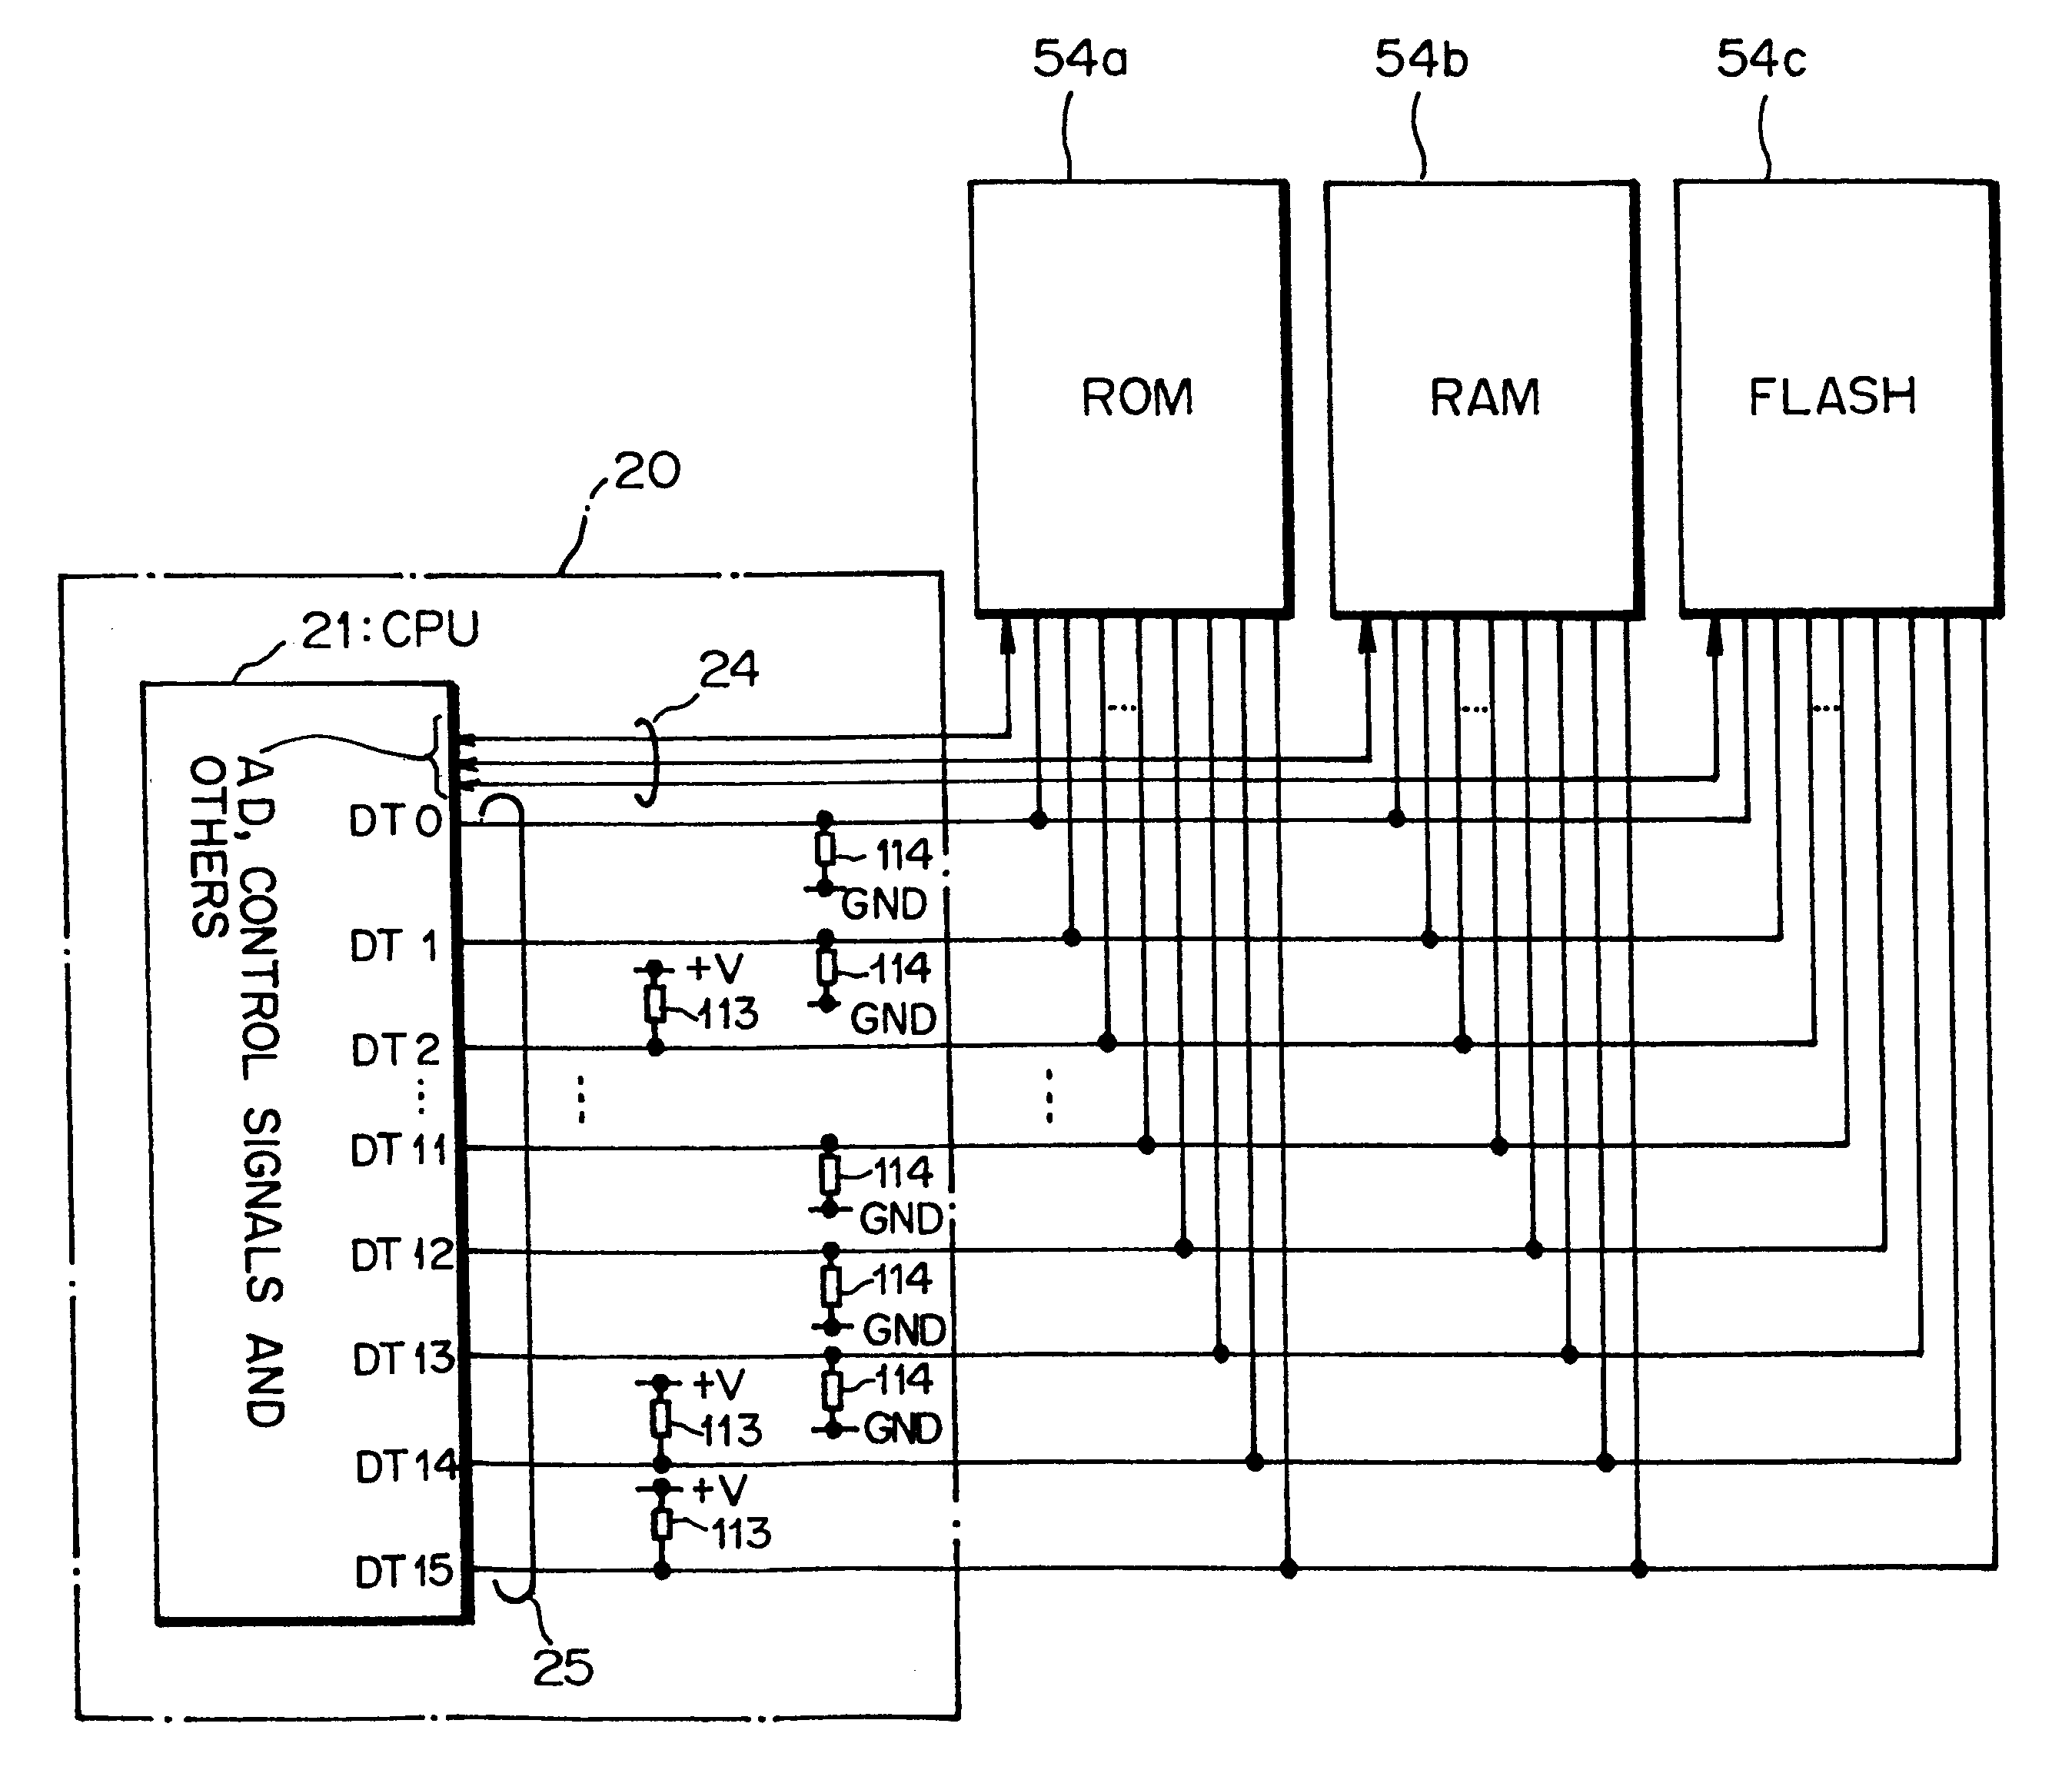 System for recognizing of a device connection state by reading structure information data which produced by pull-up resistor and pull-down resistor